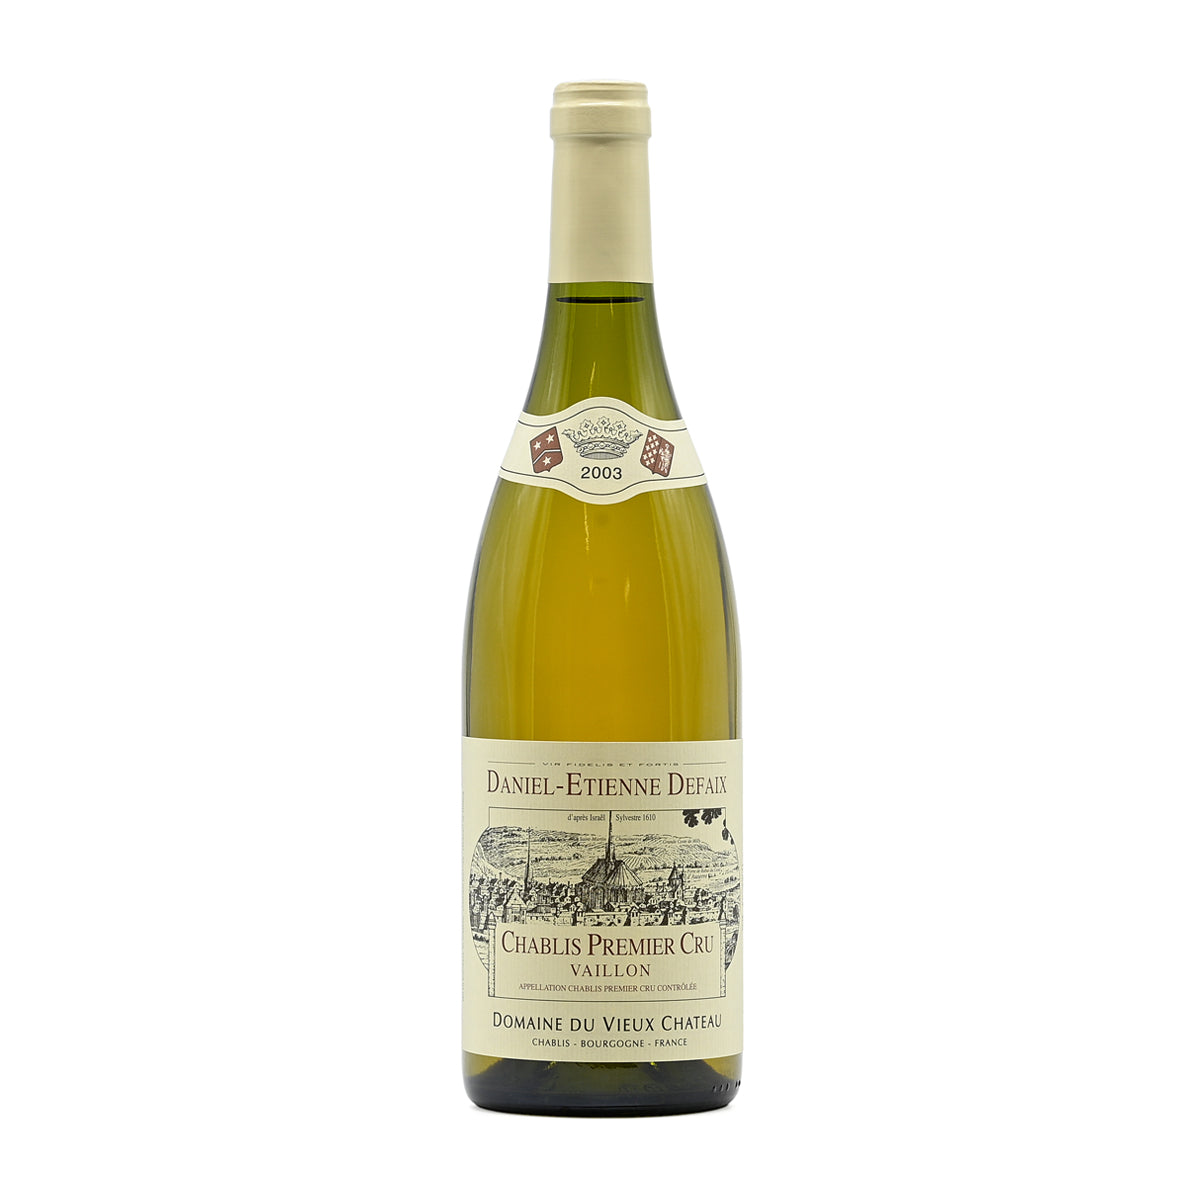 Domaine Daniel-Etienne Defaix Chablis Premier Cru Vaillon 2003, 750ml French white wine, made from Chardonnay, from Chablis Premier Cru, Burgundy, France – GDV Fine Wines, Hong Kong